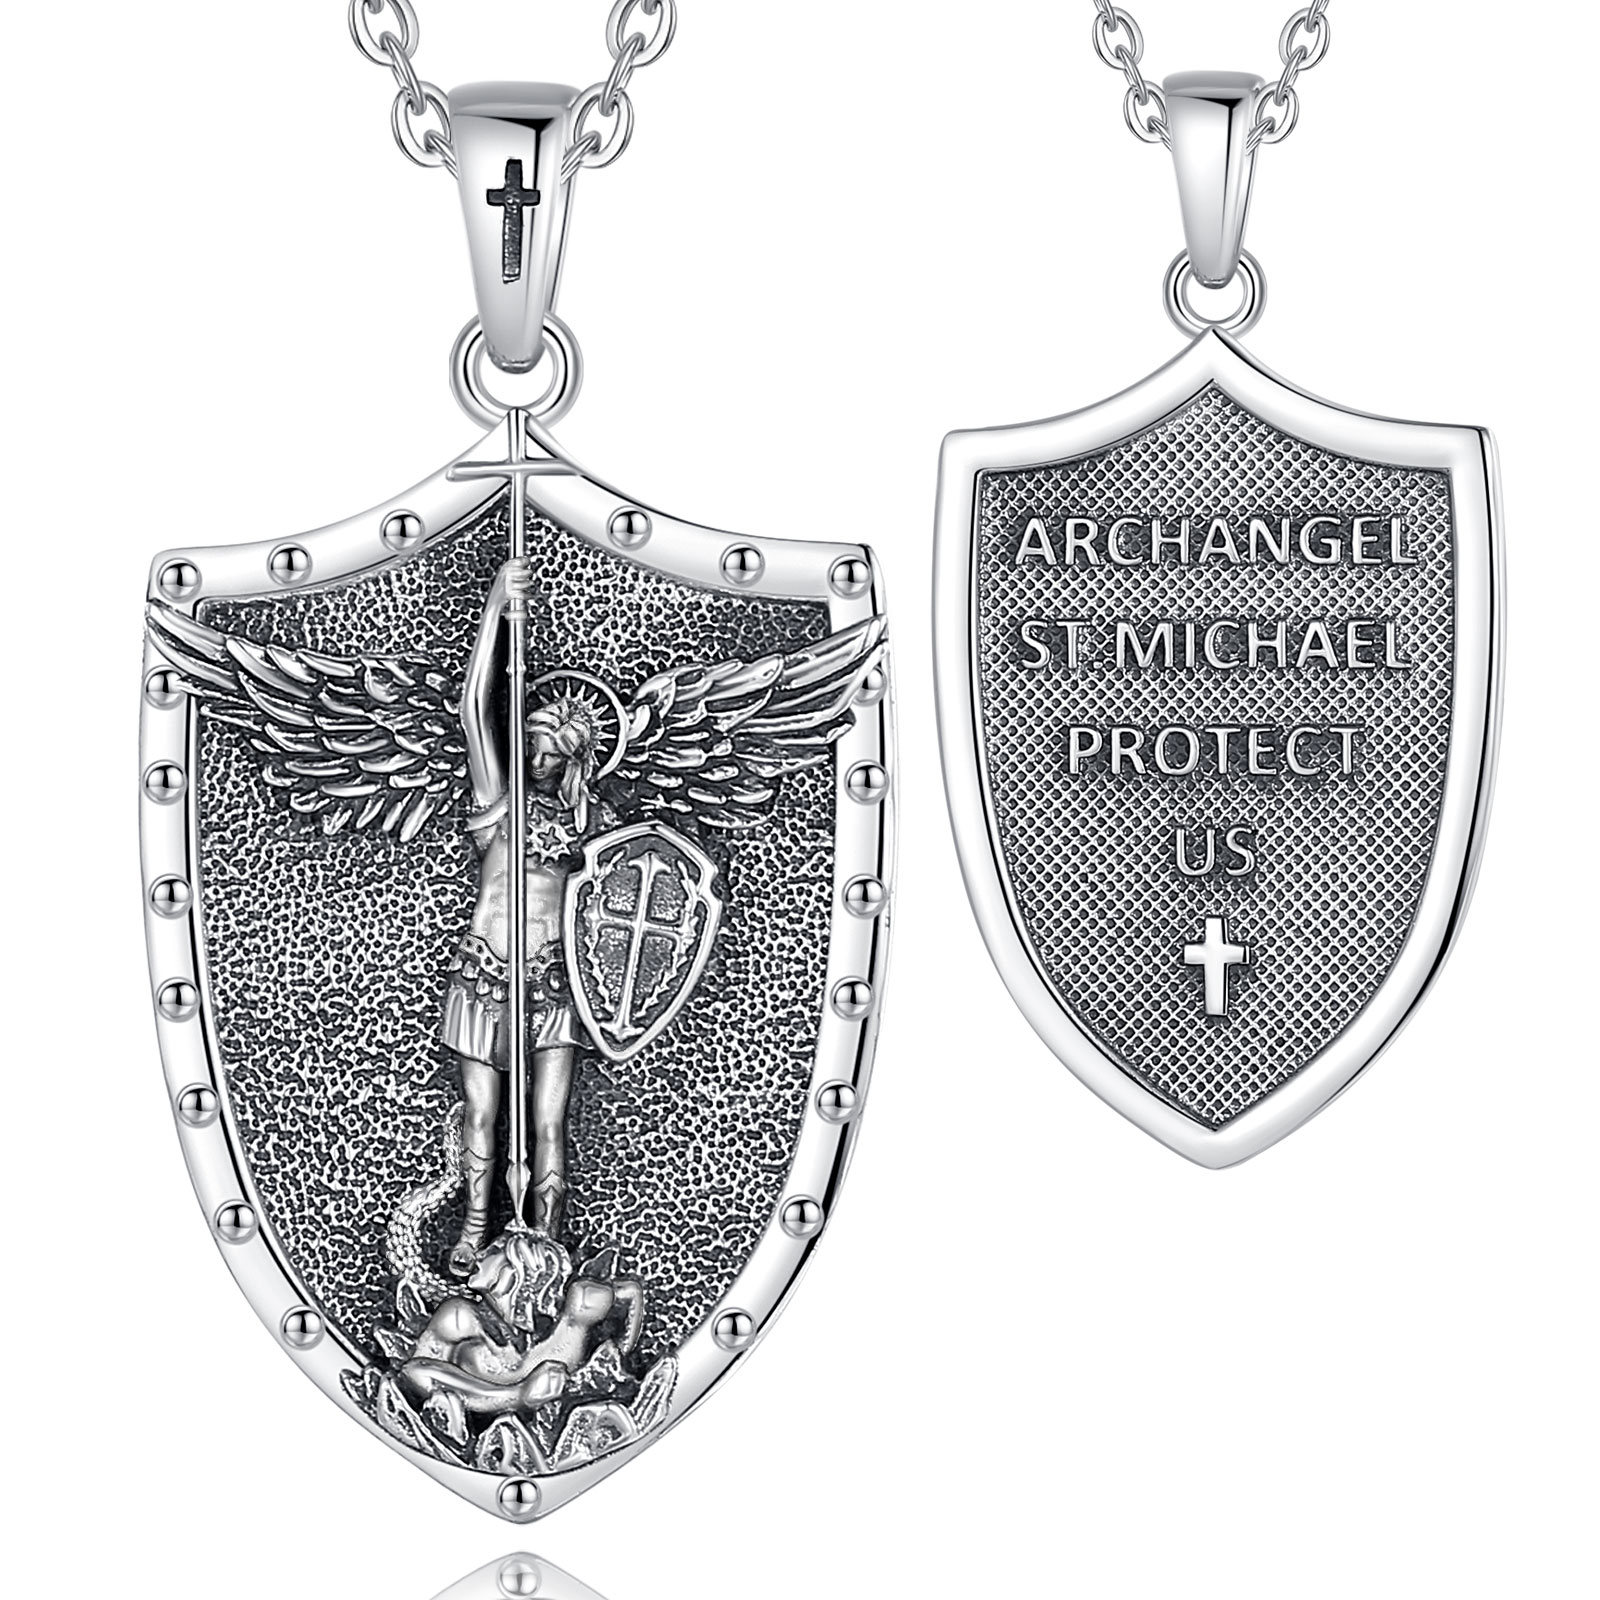 High-Quality 925 Sterling Silver Archangel St. Michael Shield Pendant Necklace by Merryshine Jewelry